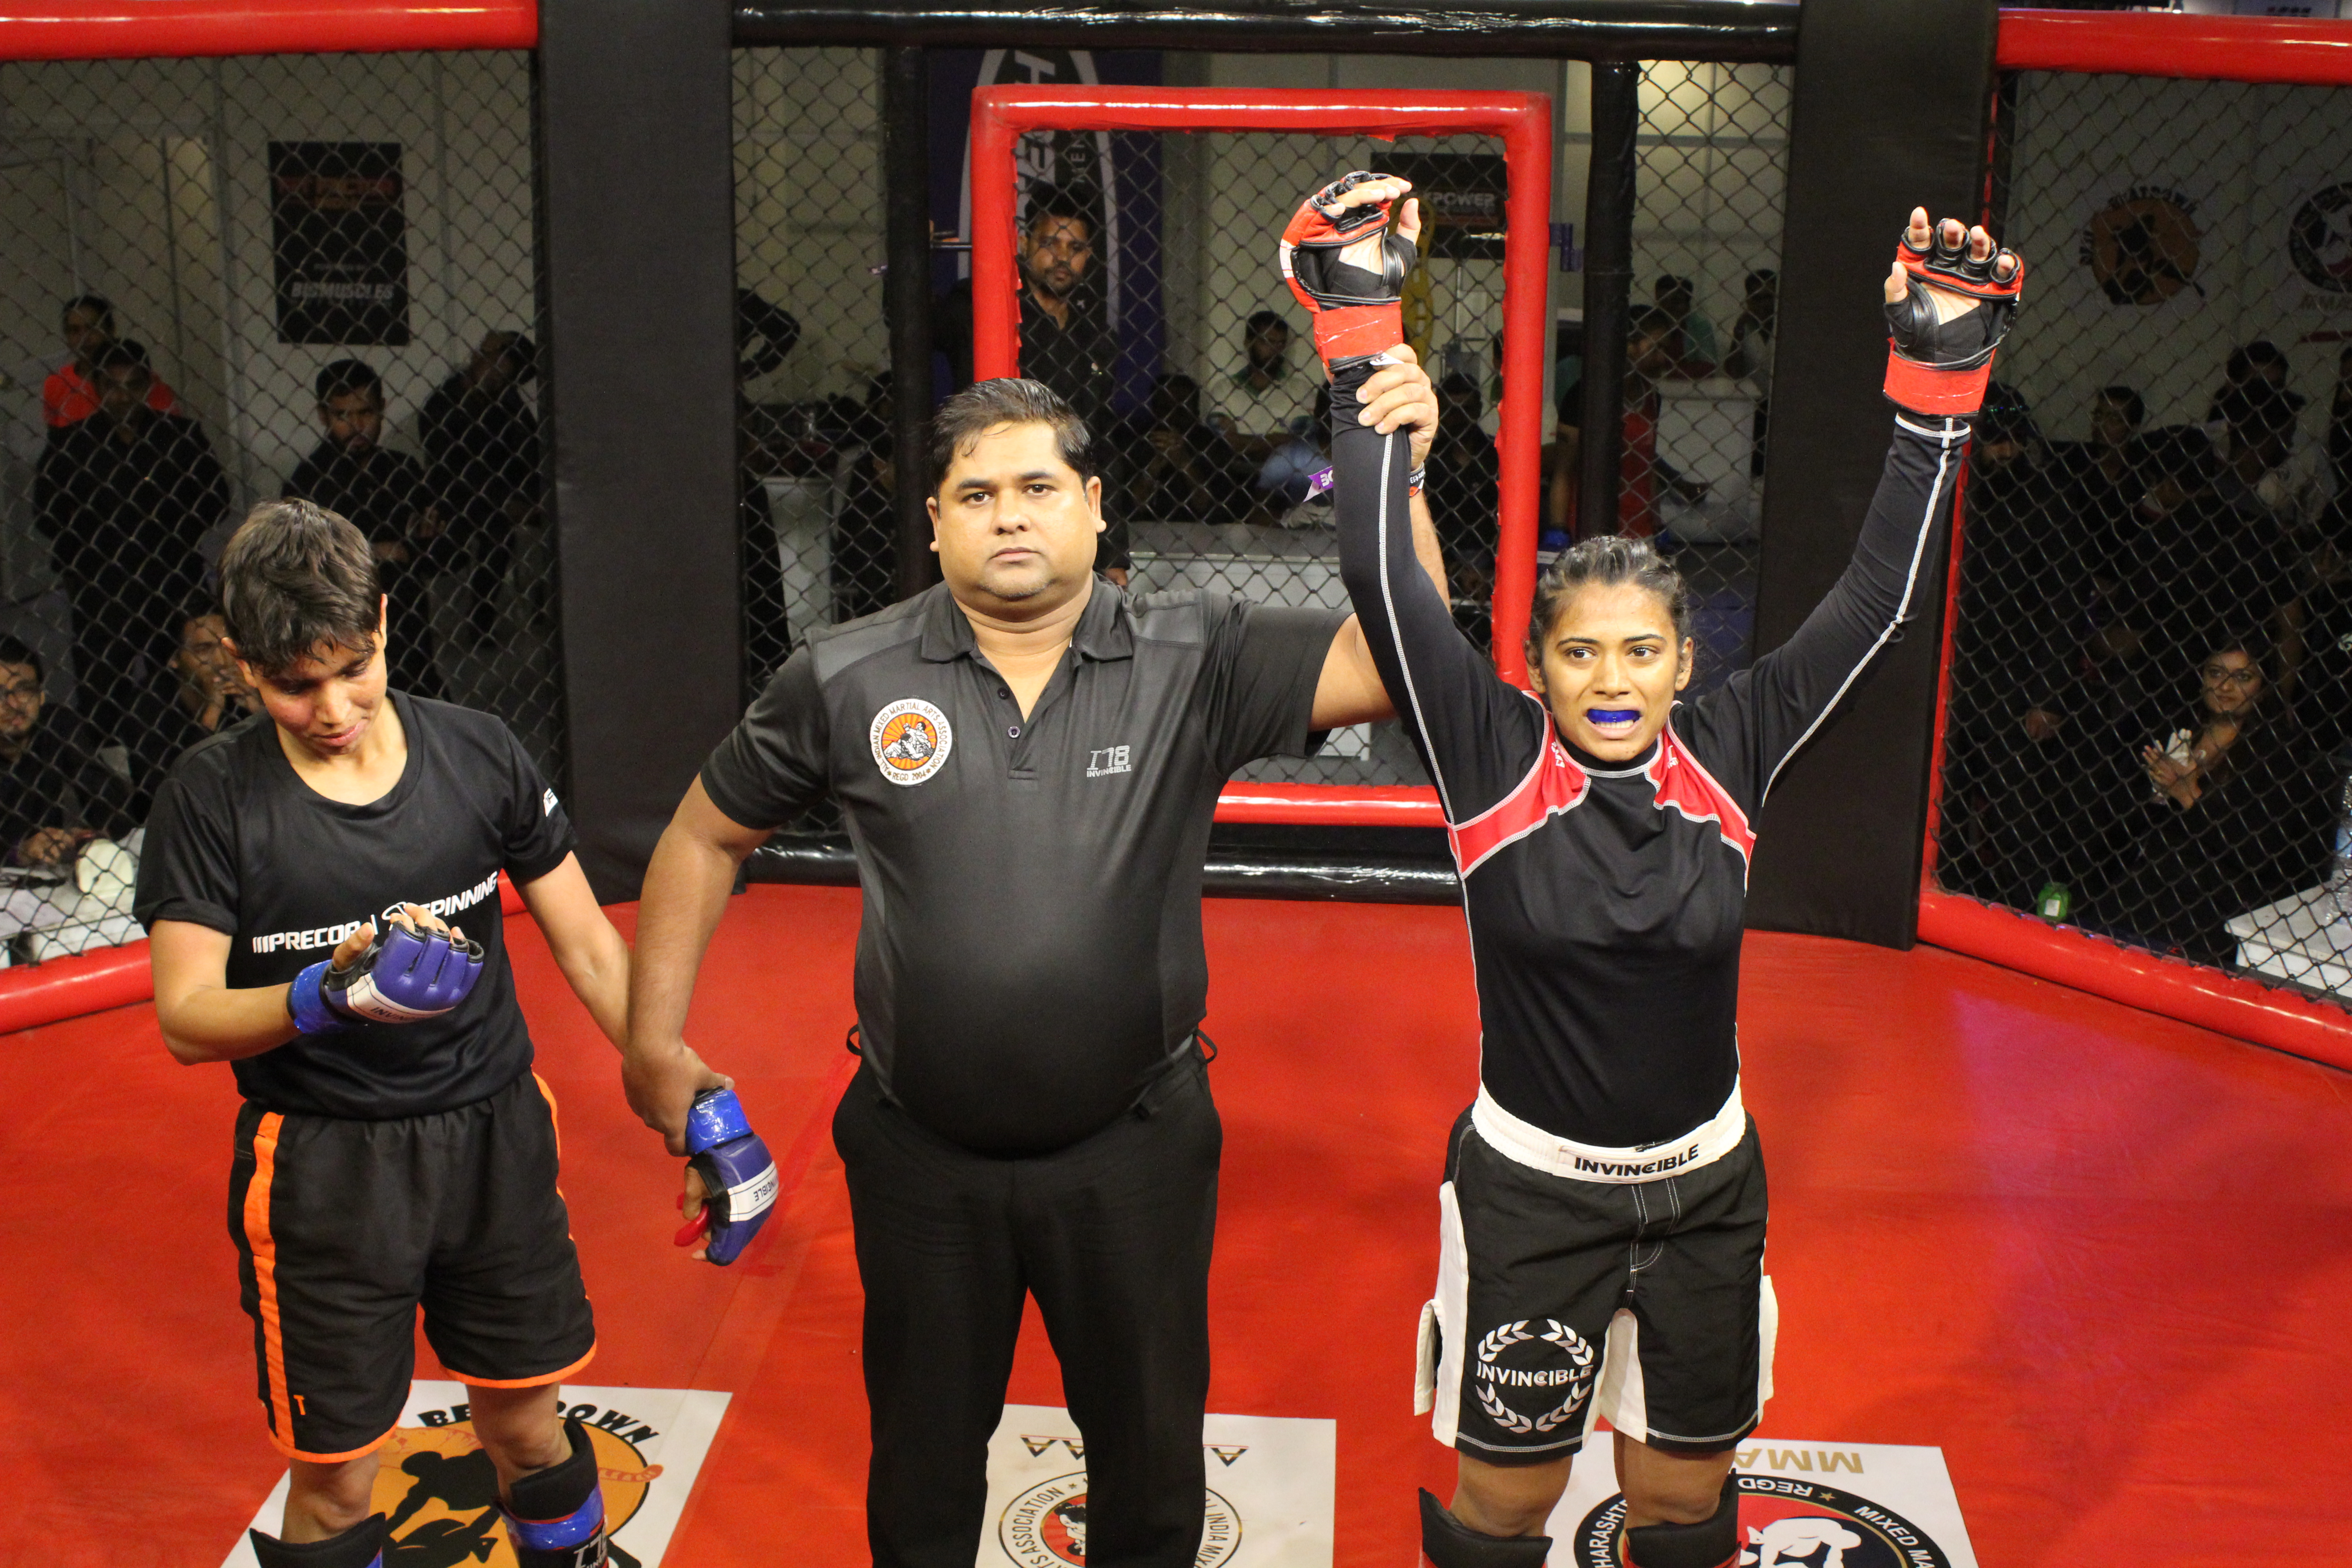 Indian team for the IMMAF World Championships 2017: A closer look at the athletes representing the nation -